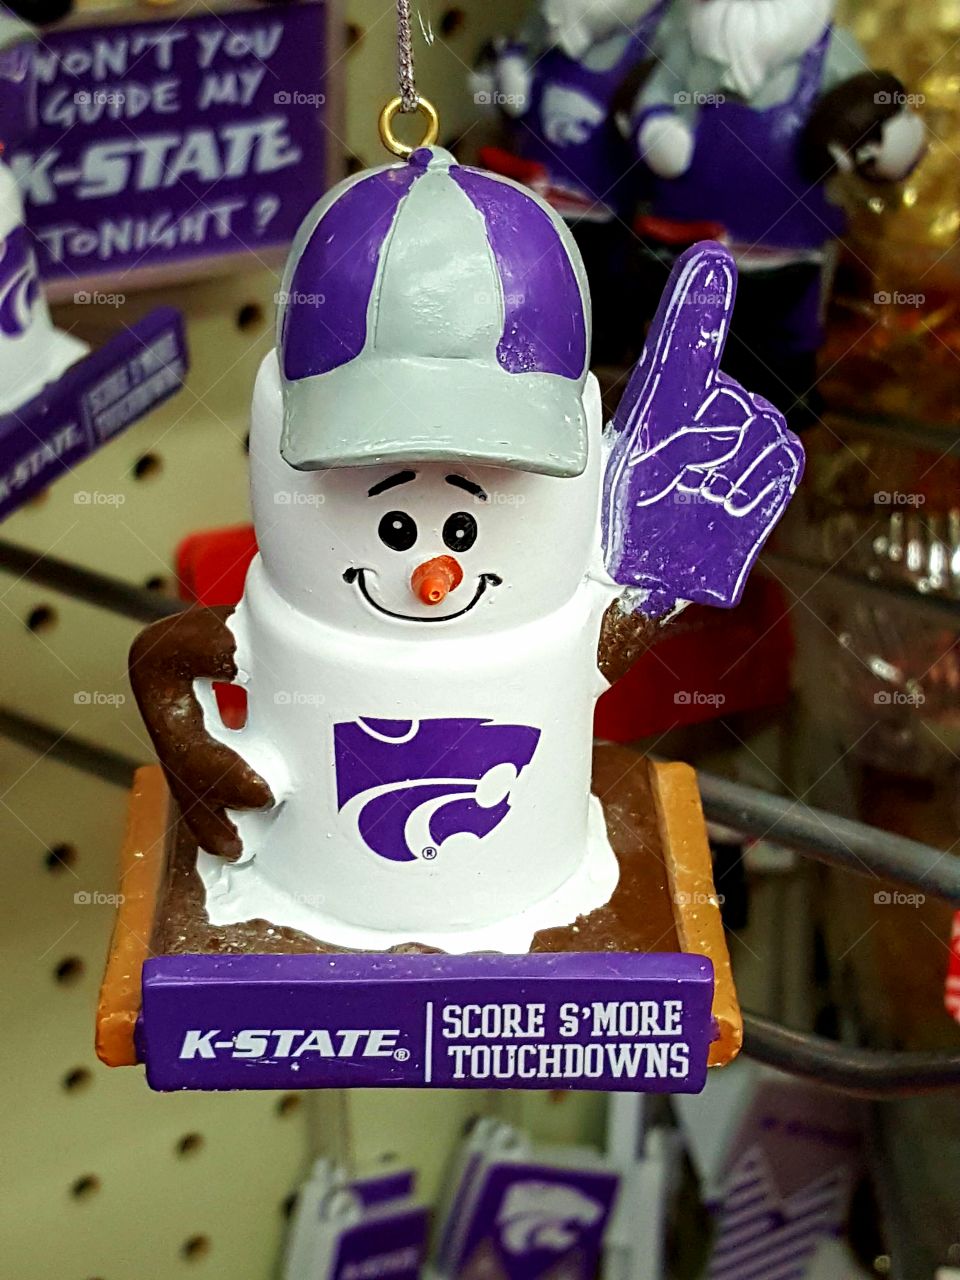 A K-state Frosty! I found this very sporty little guy while I was browsing a retail outlet. What will they think of next? Lol.